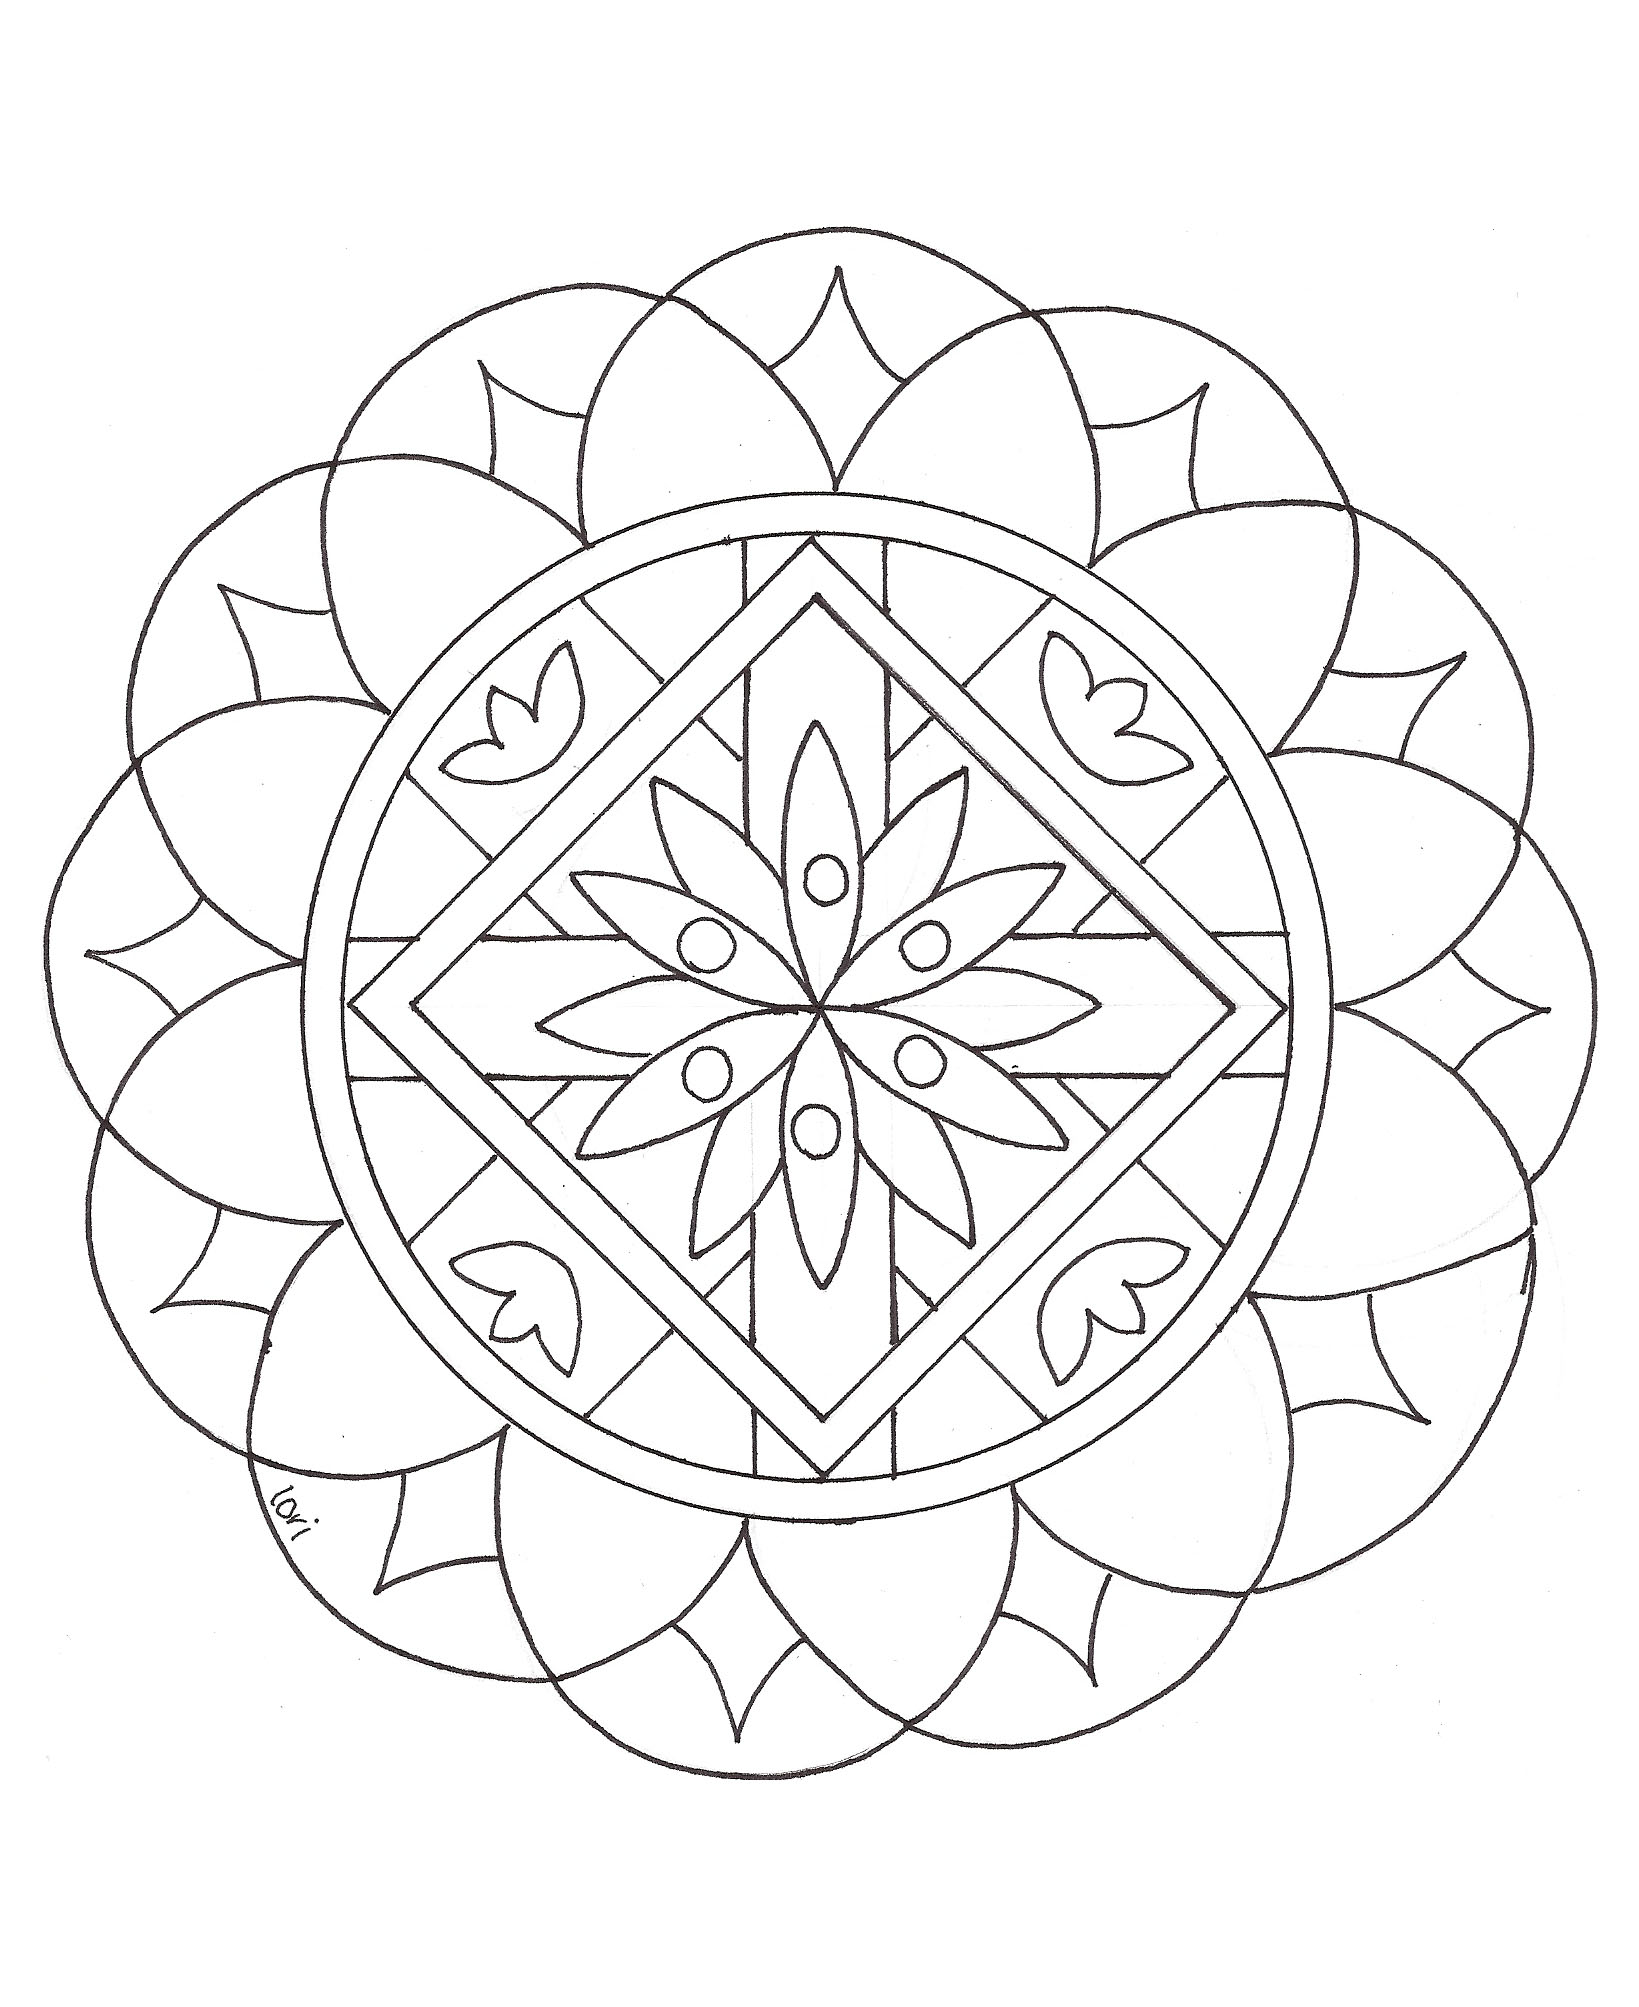 Simple mandala 2 - M&alas Coloring pages for kids to print & color